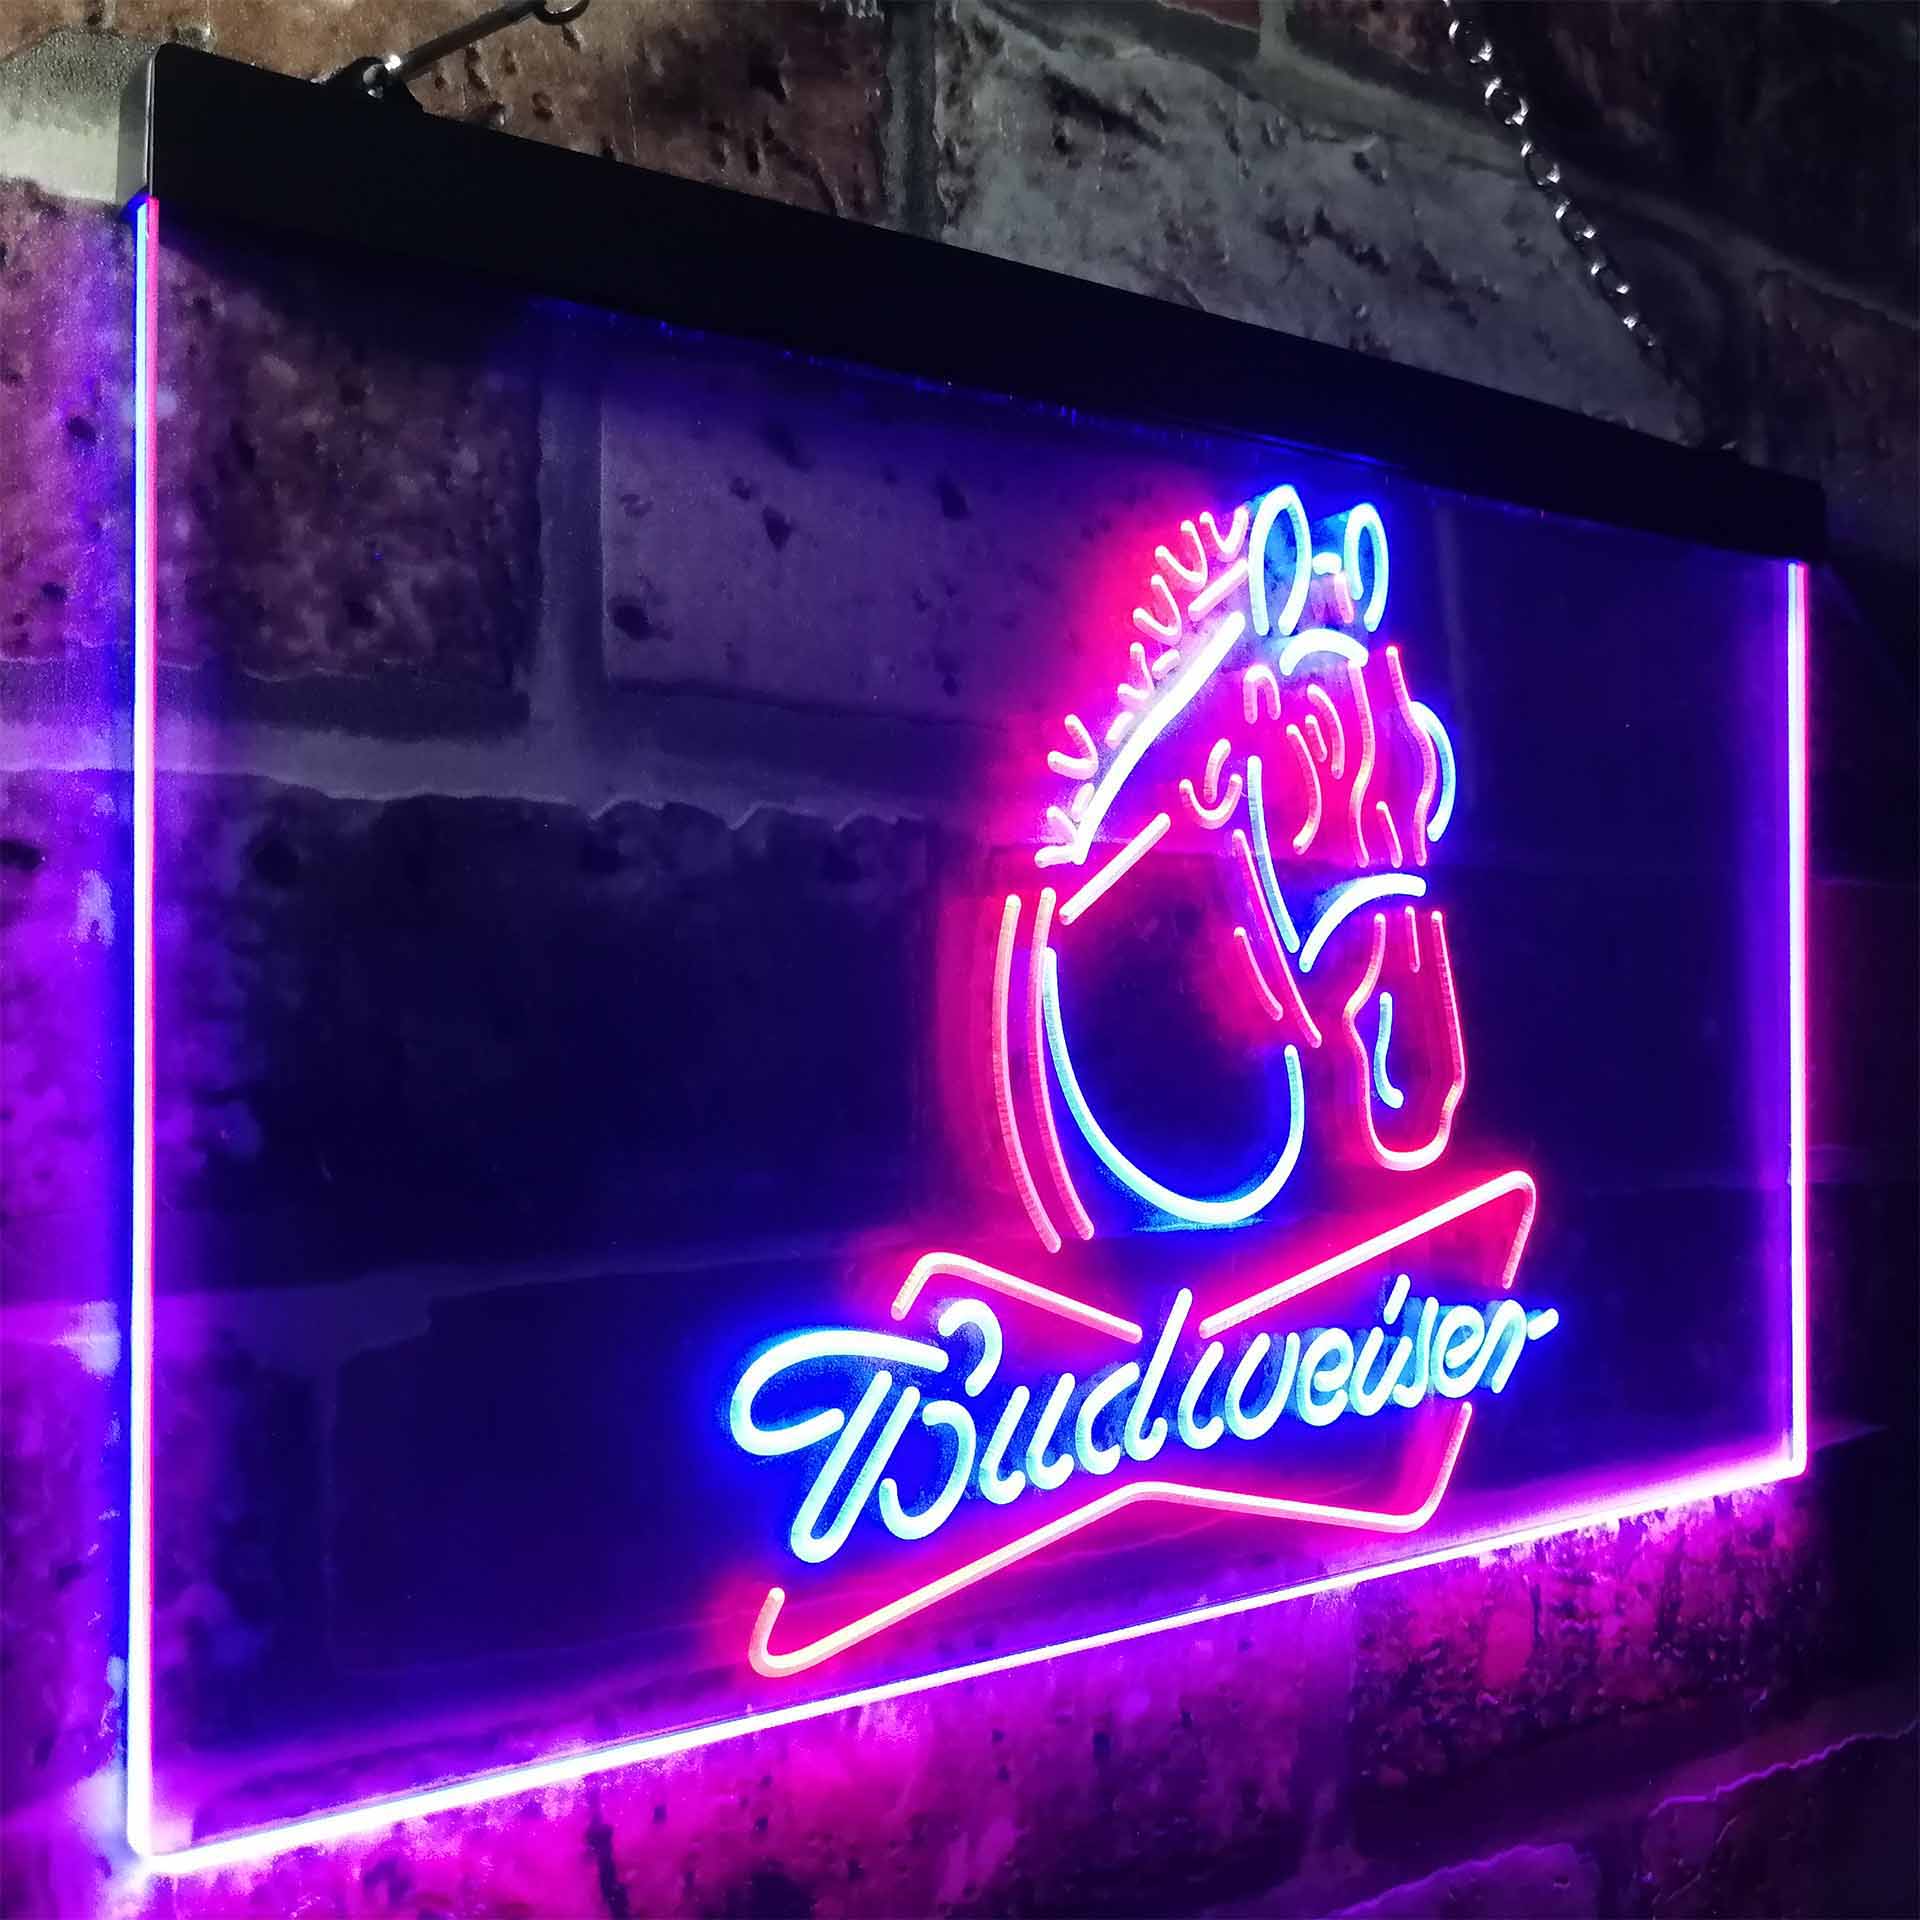 Budweiser Clydesdale Horse Head Neon LED Sign